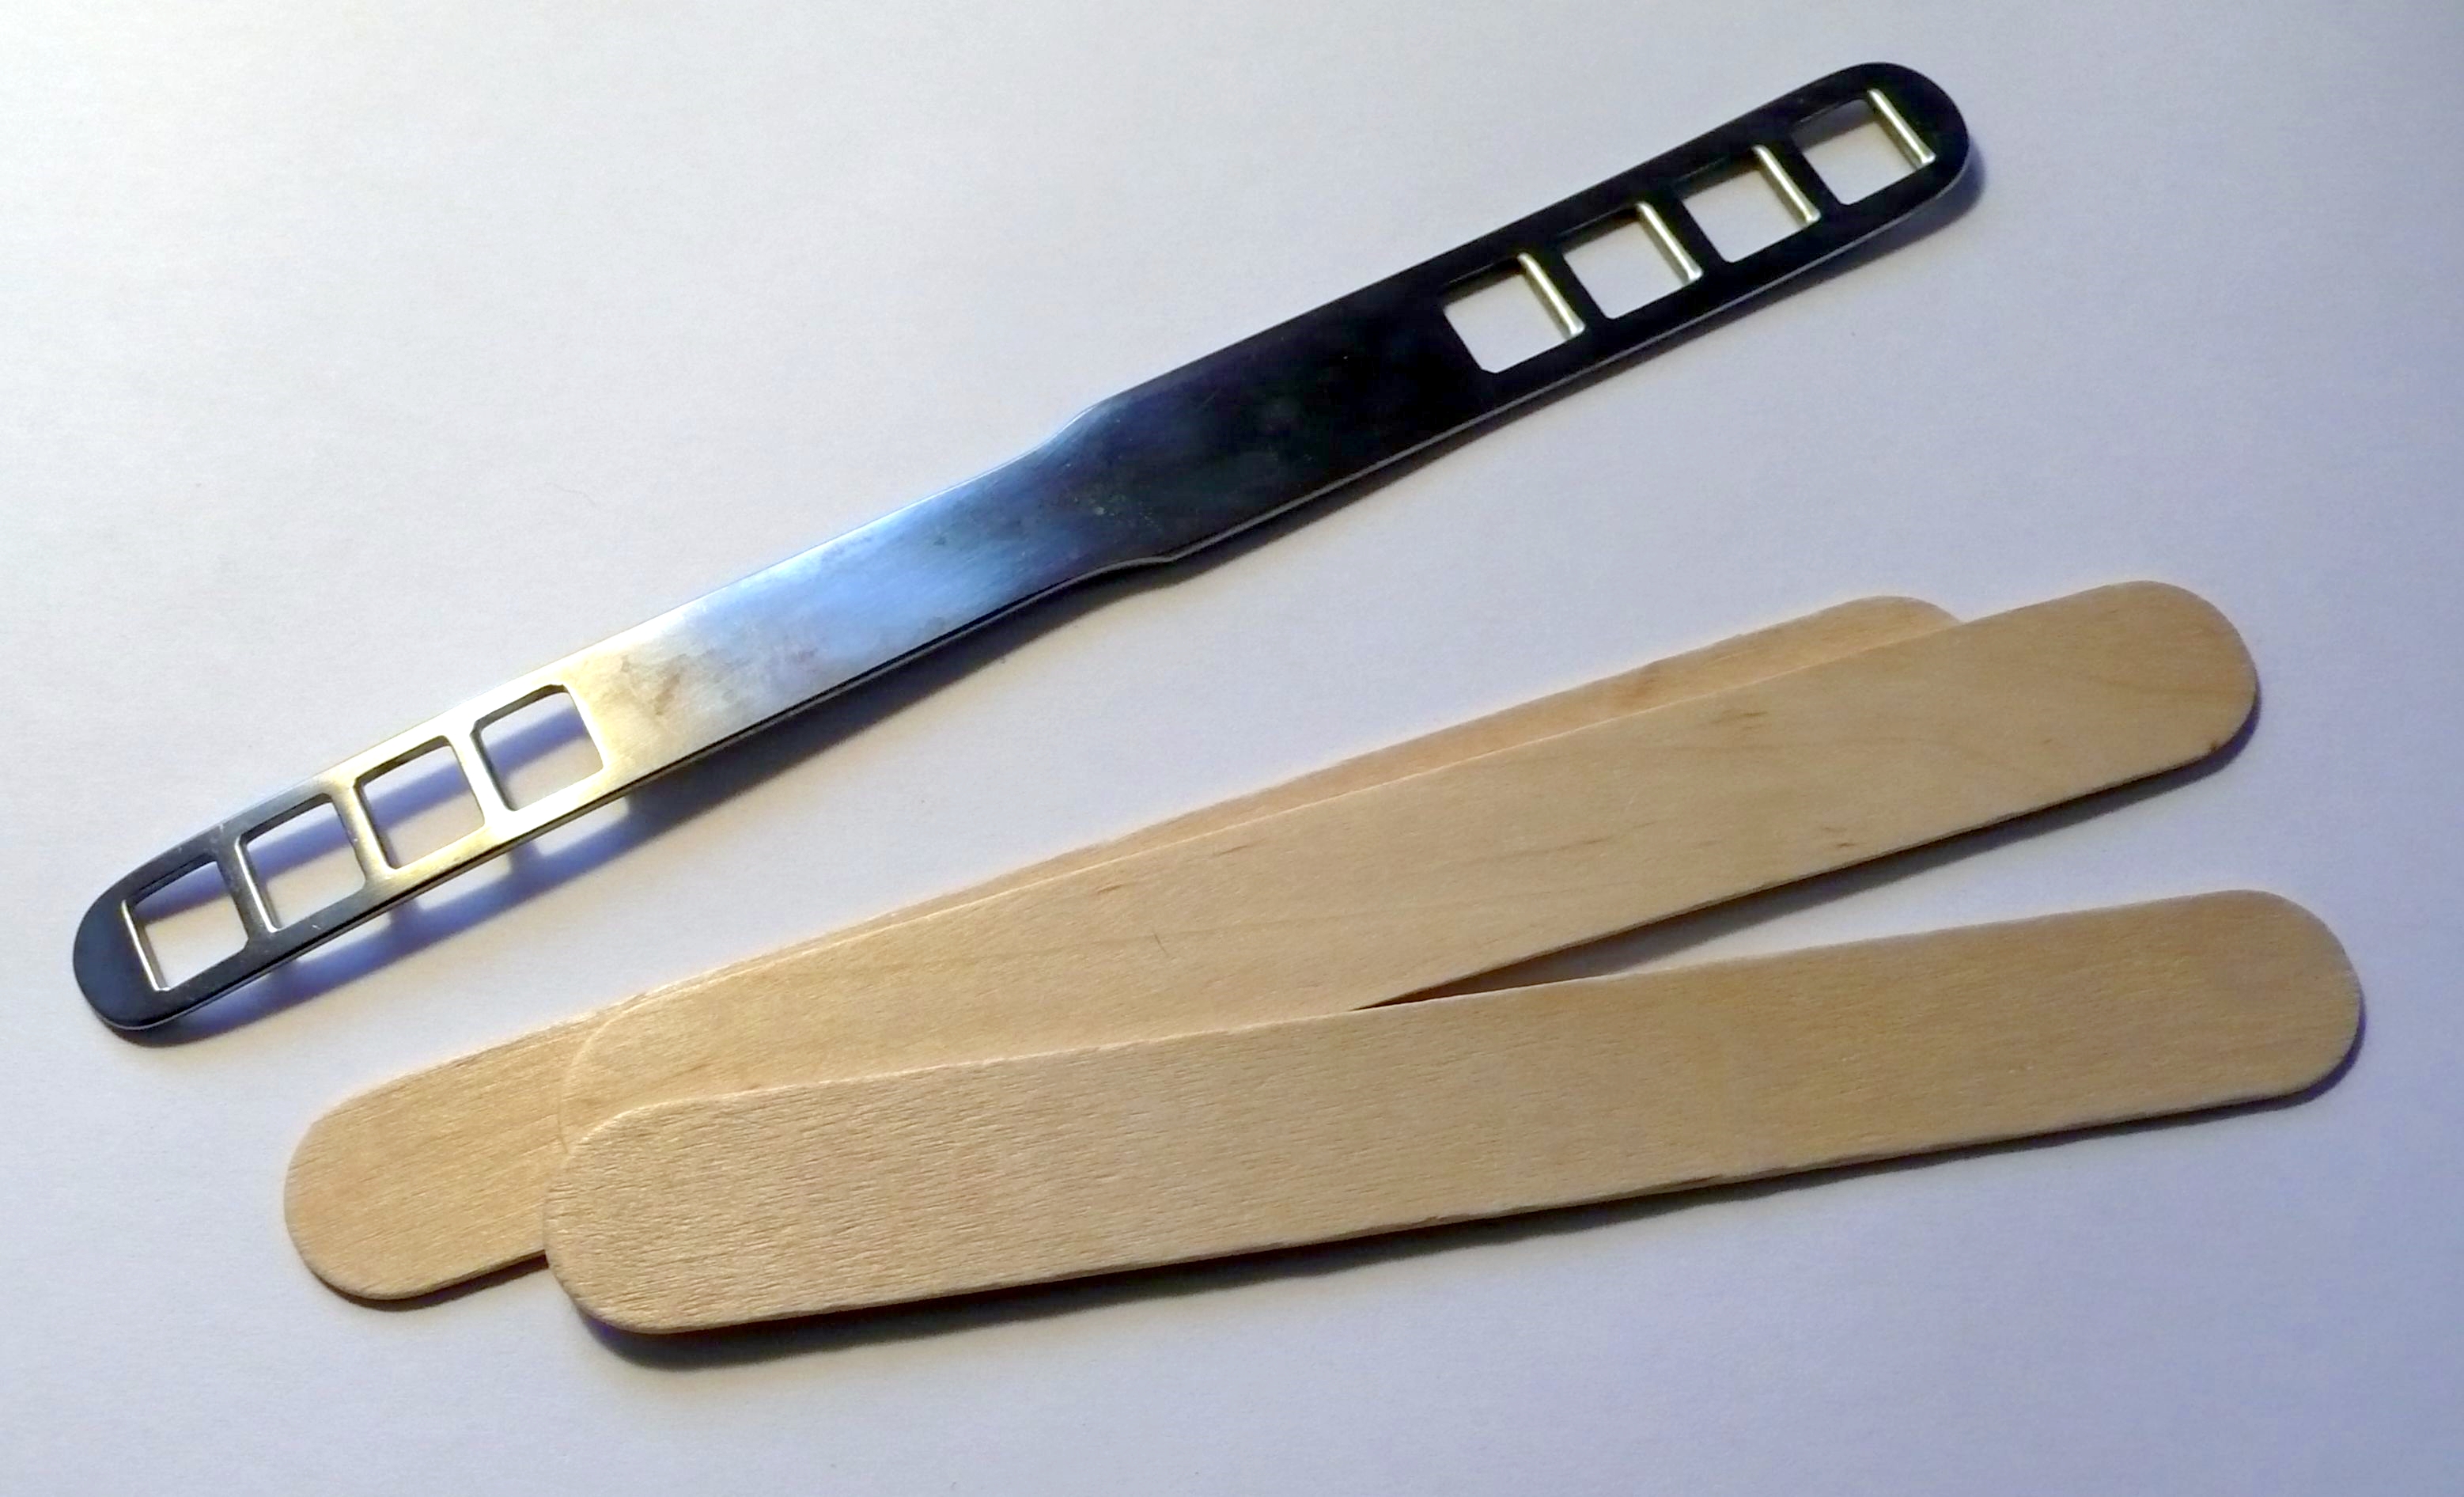 Tongue Depressor | 10 Uncommon First Aid Items To Have On Hand For An Emergency